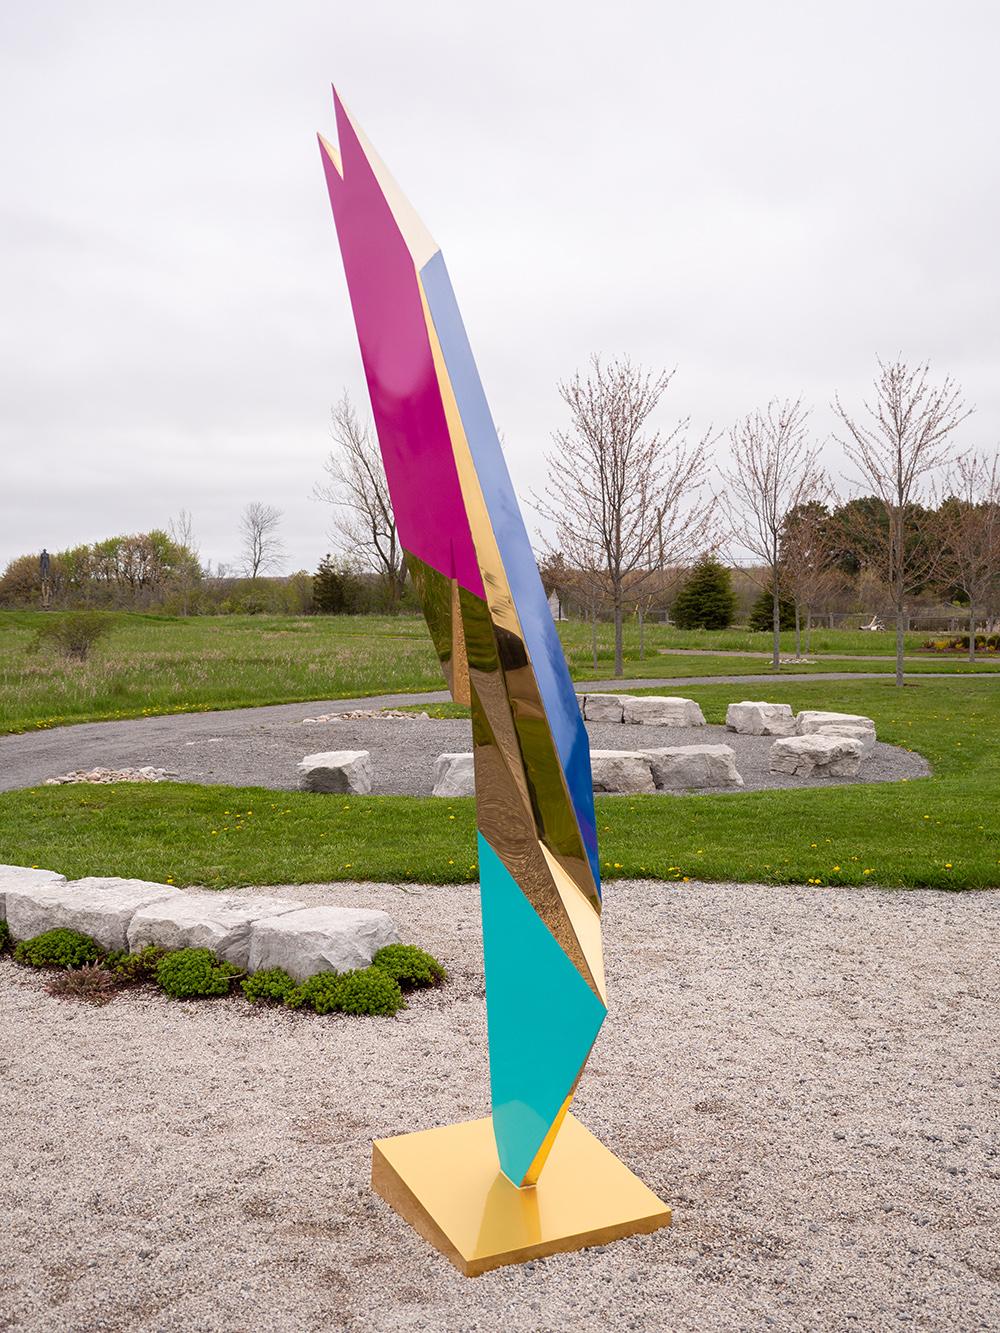 Fragment- Gold Plated Stainless Steel - post-pop, abstract, outdoor sculpture - Gray Abstract Sculpture by Viktor Mitic